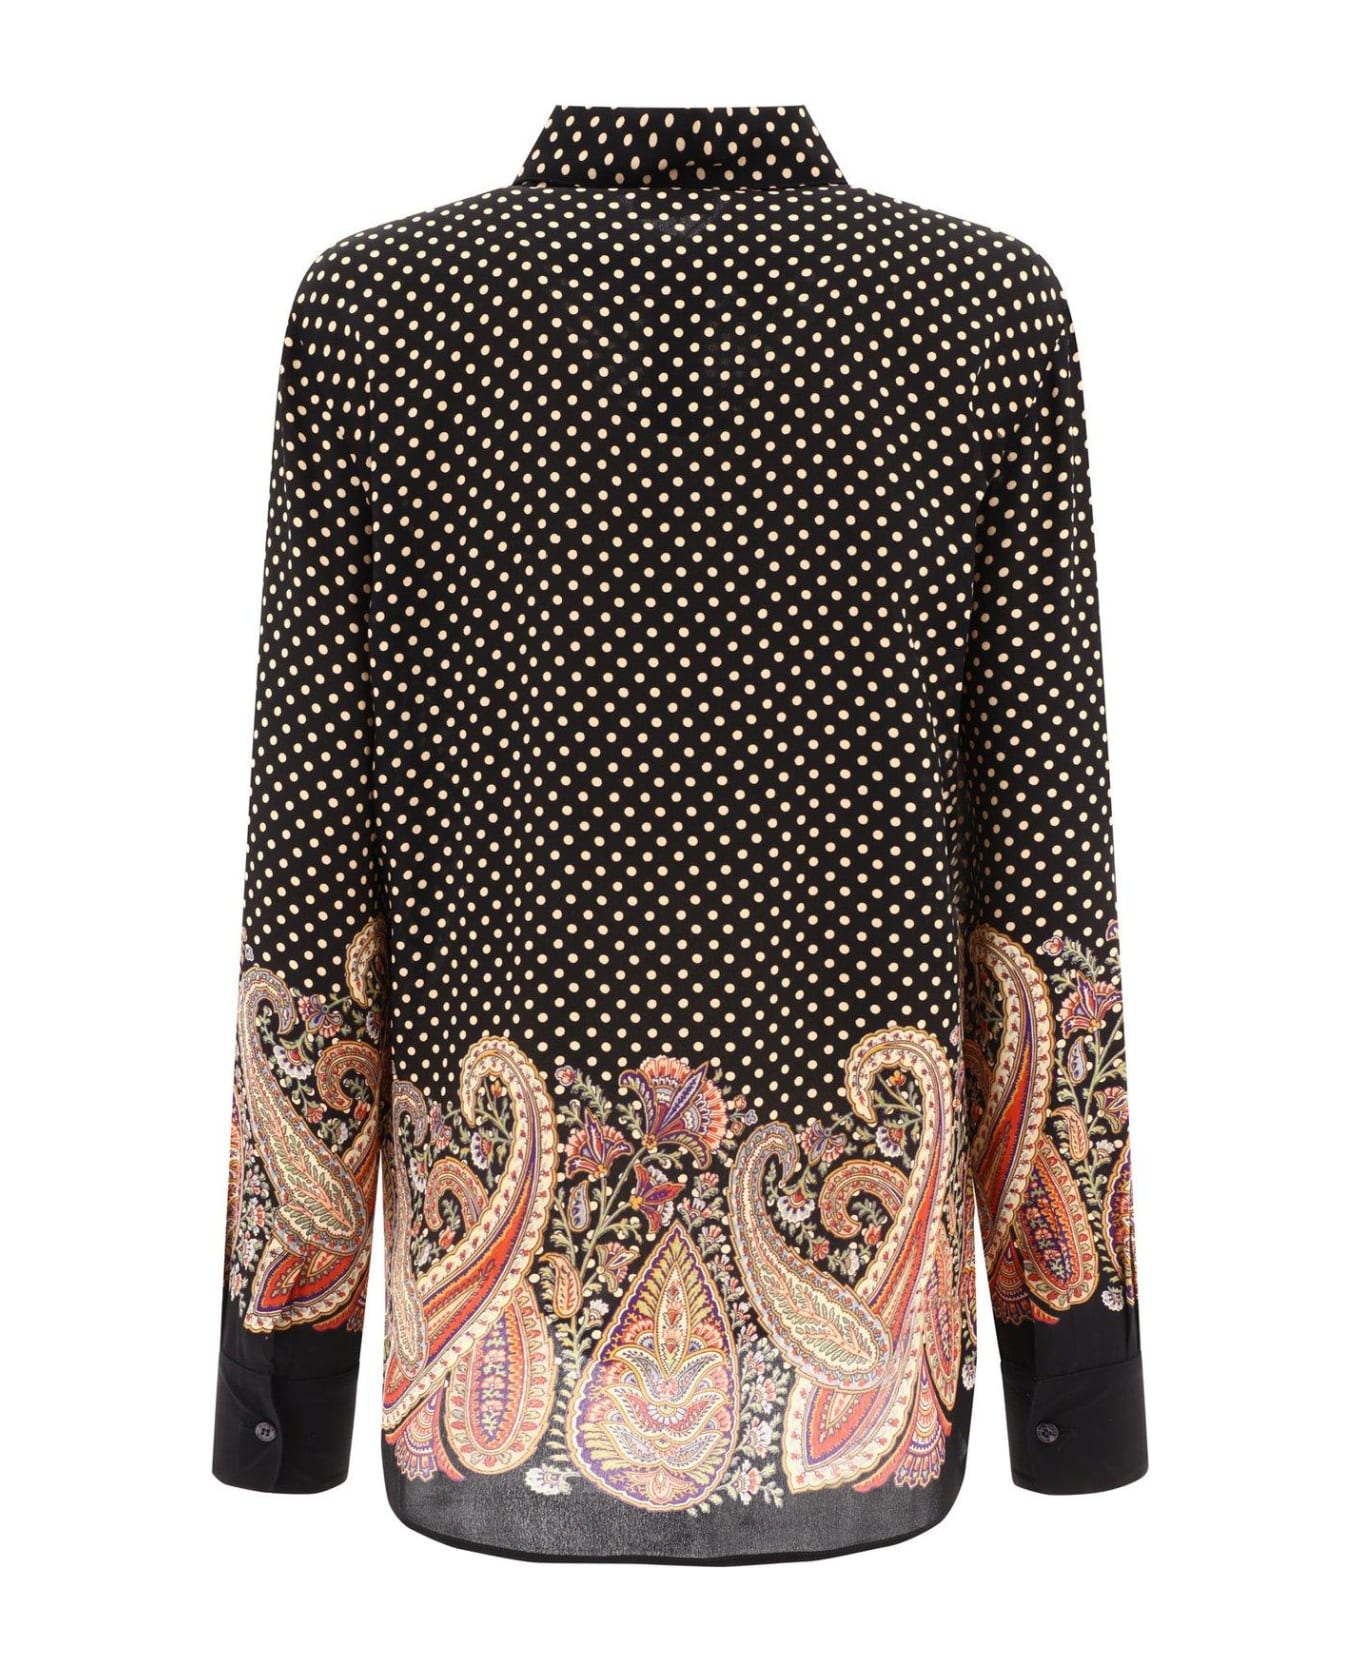 Etro All-over Paisley Printed Long-sleeved Blouse - Black シャツ